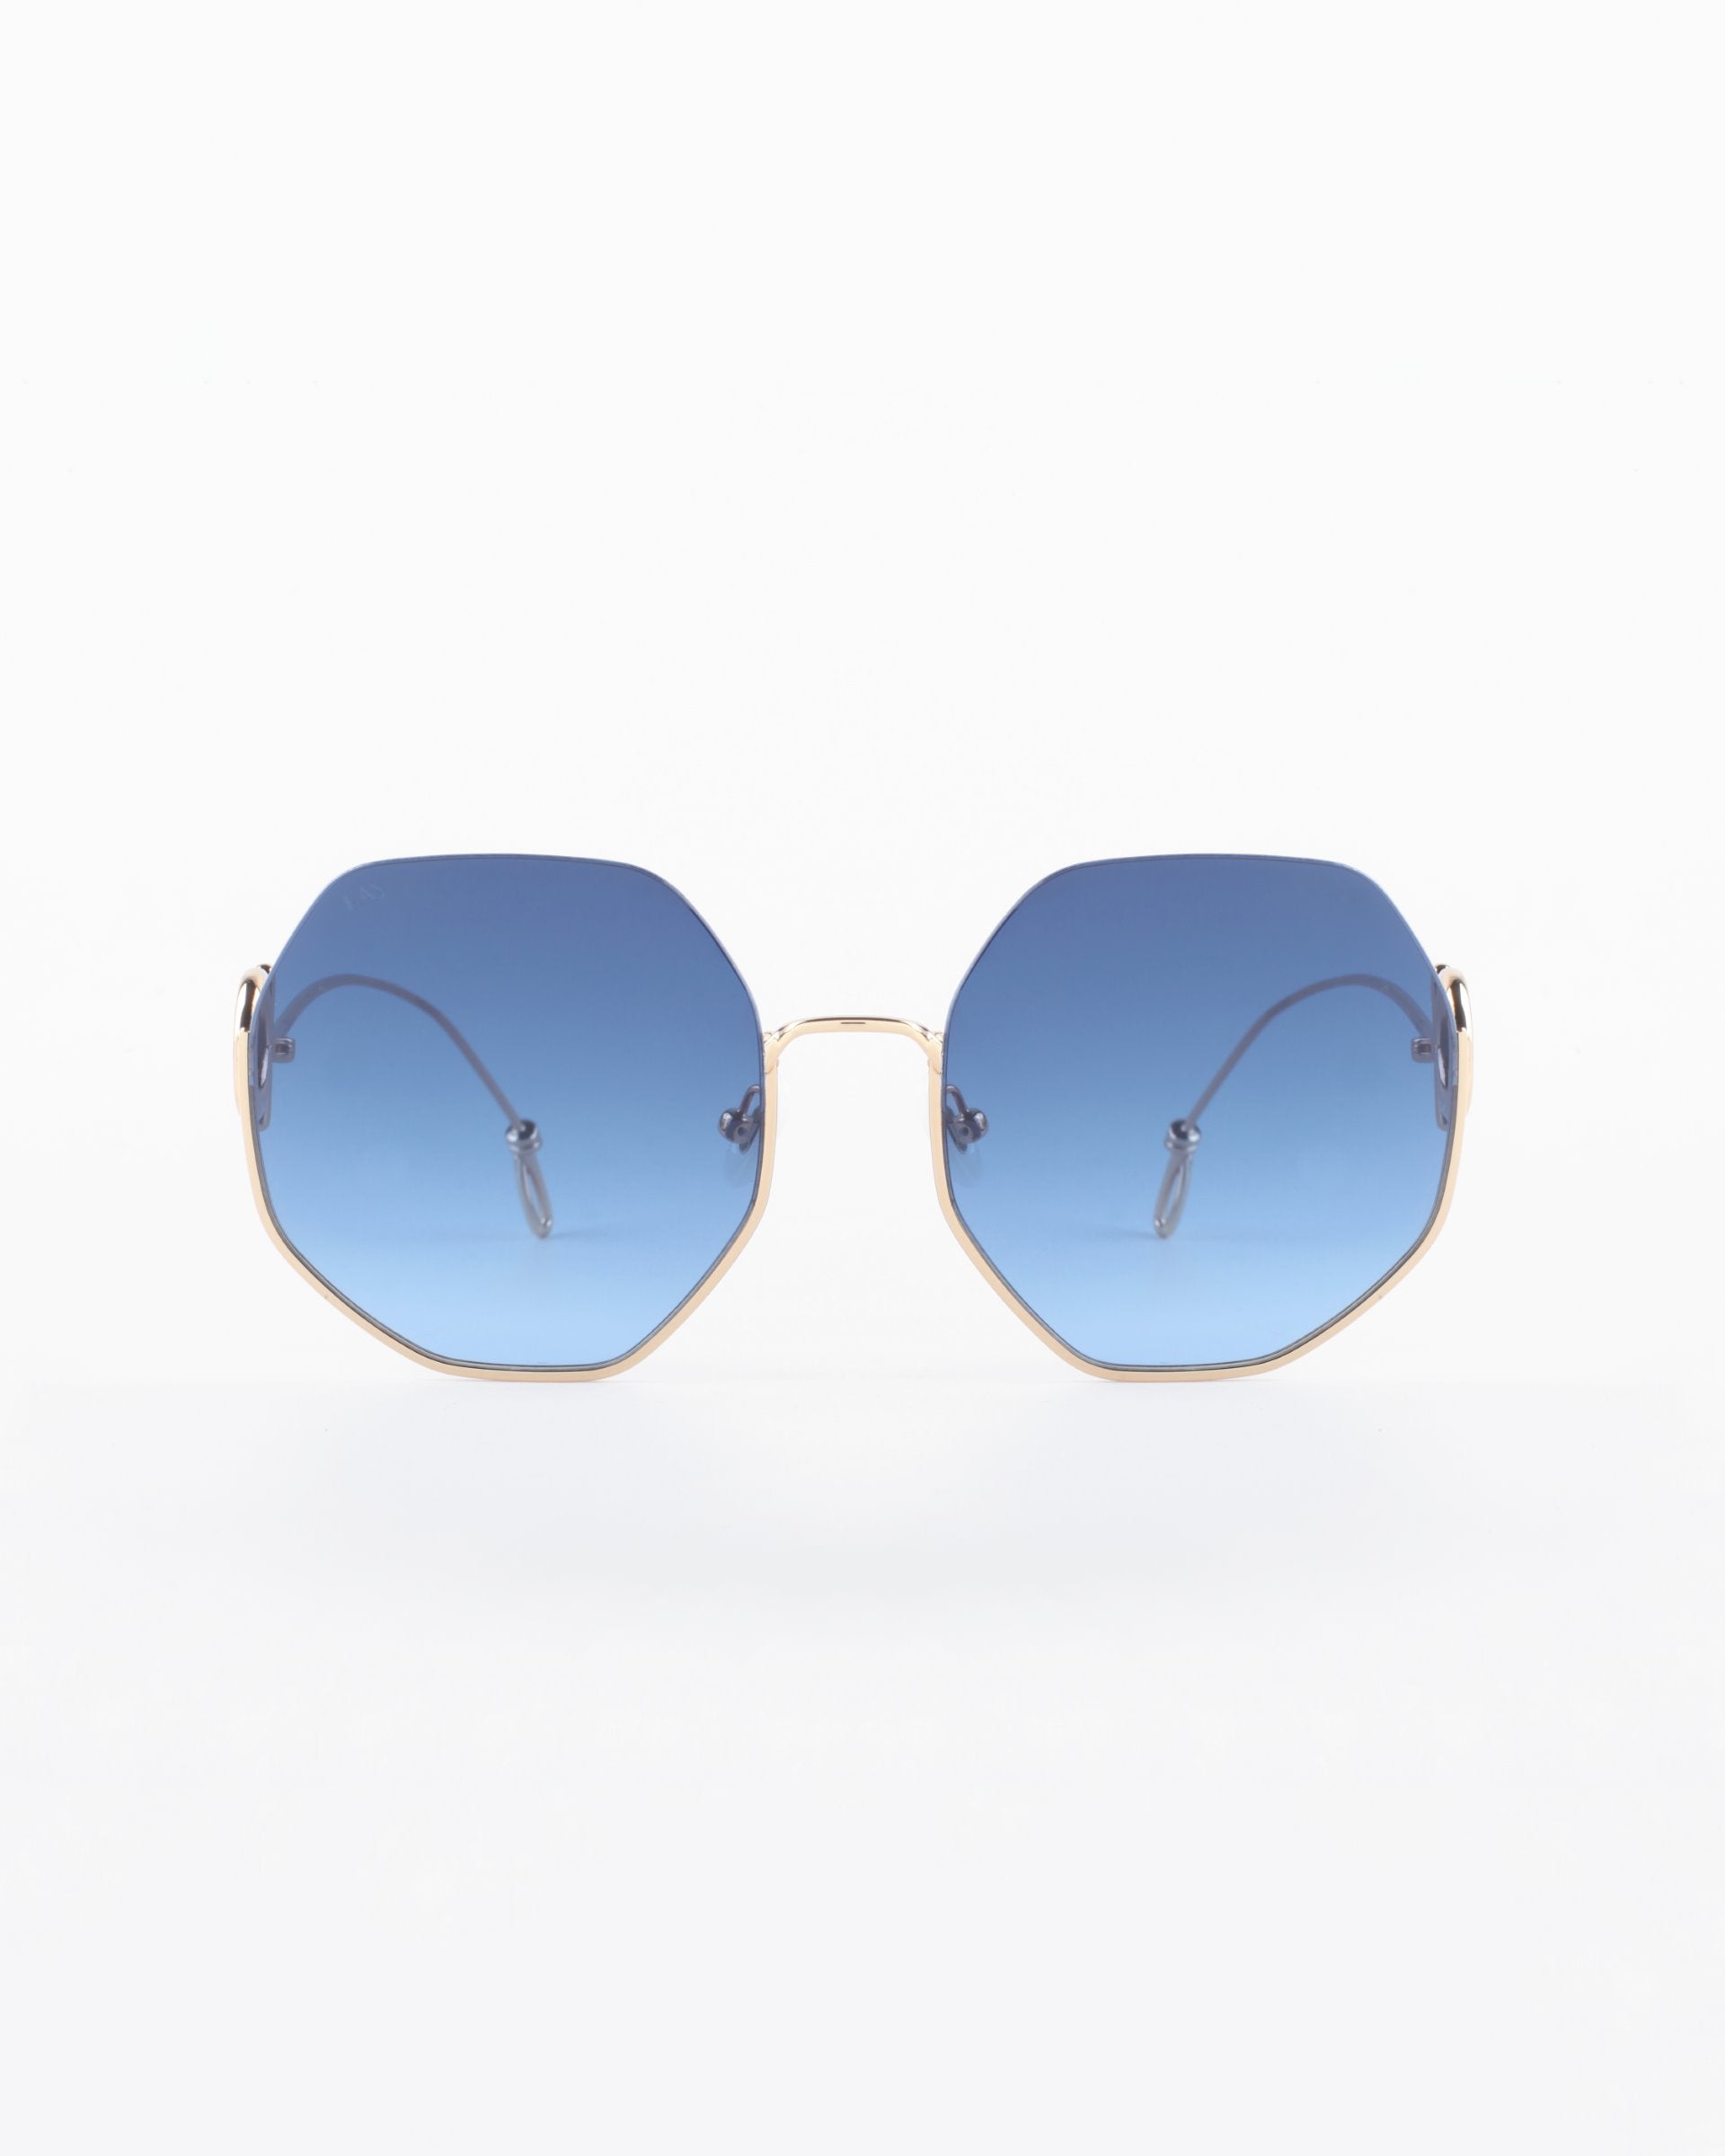 A pair of For Art's Sake® Palace UVA & UVB-protected sunglasses with 18-karat gold-plated wire frames and blue-tinted hexagonal lenses is centered against a white background. The temples extend from the frames to thin, curved earpieces. The overall design is modern and minimalist.